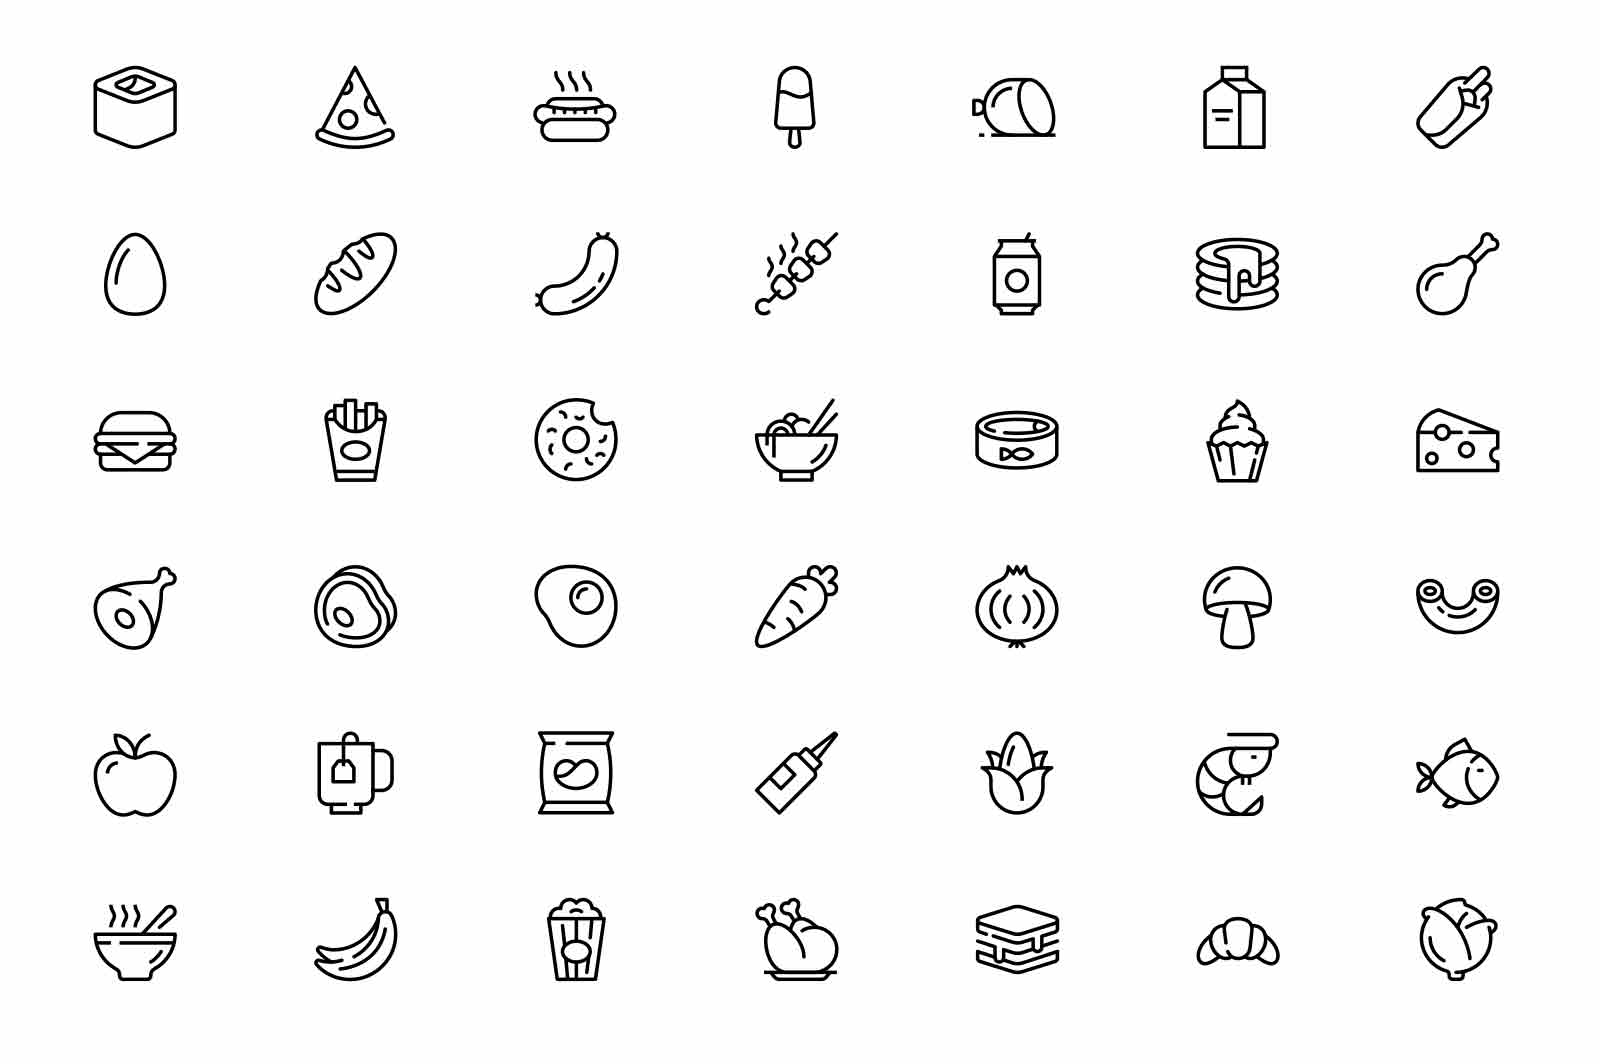 Food and drink related icons set vector illustration. Homemade, fast food and take away line icon. Eating and nutrition concept